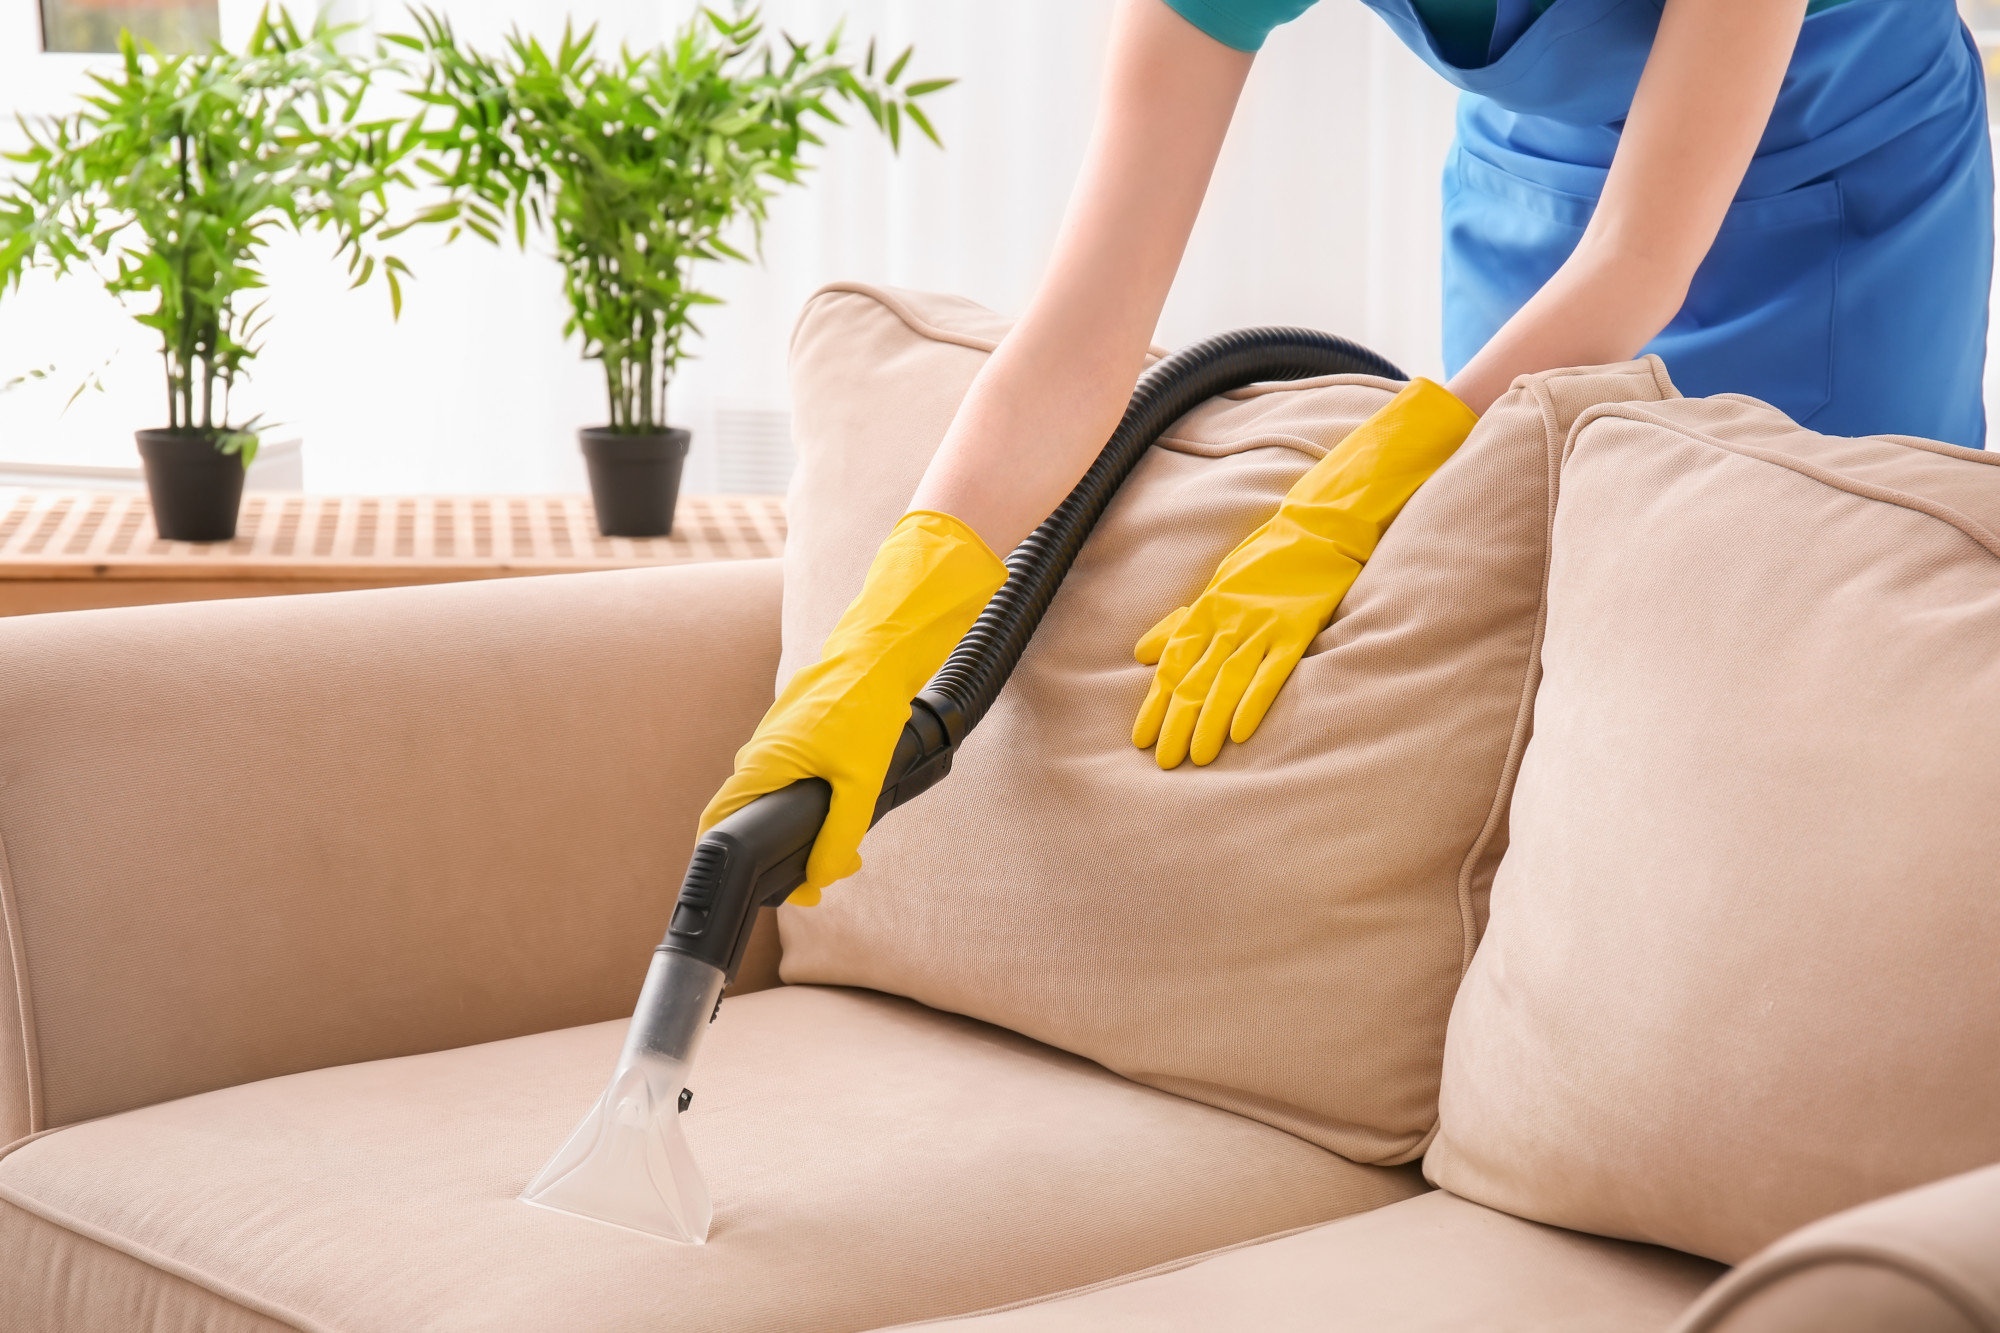 How To Clean A Smelly Couch, Can I Use Bicarbonate Of Soda To Clean My Sofa